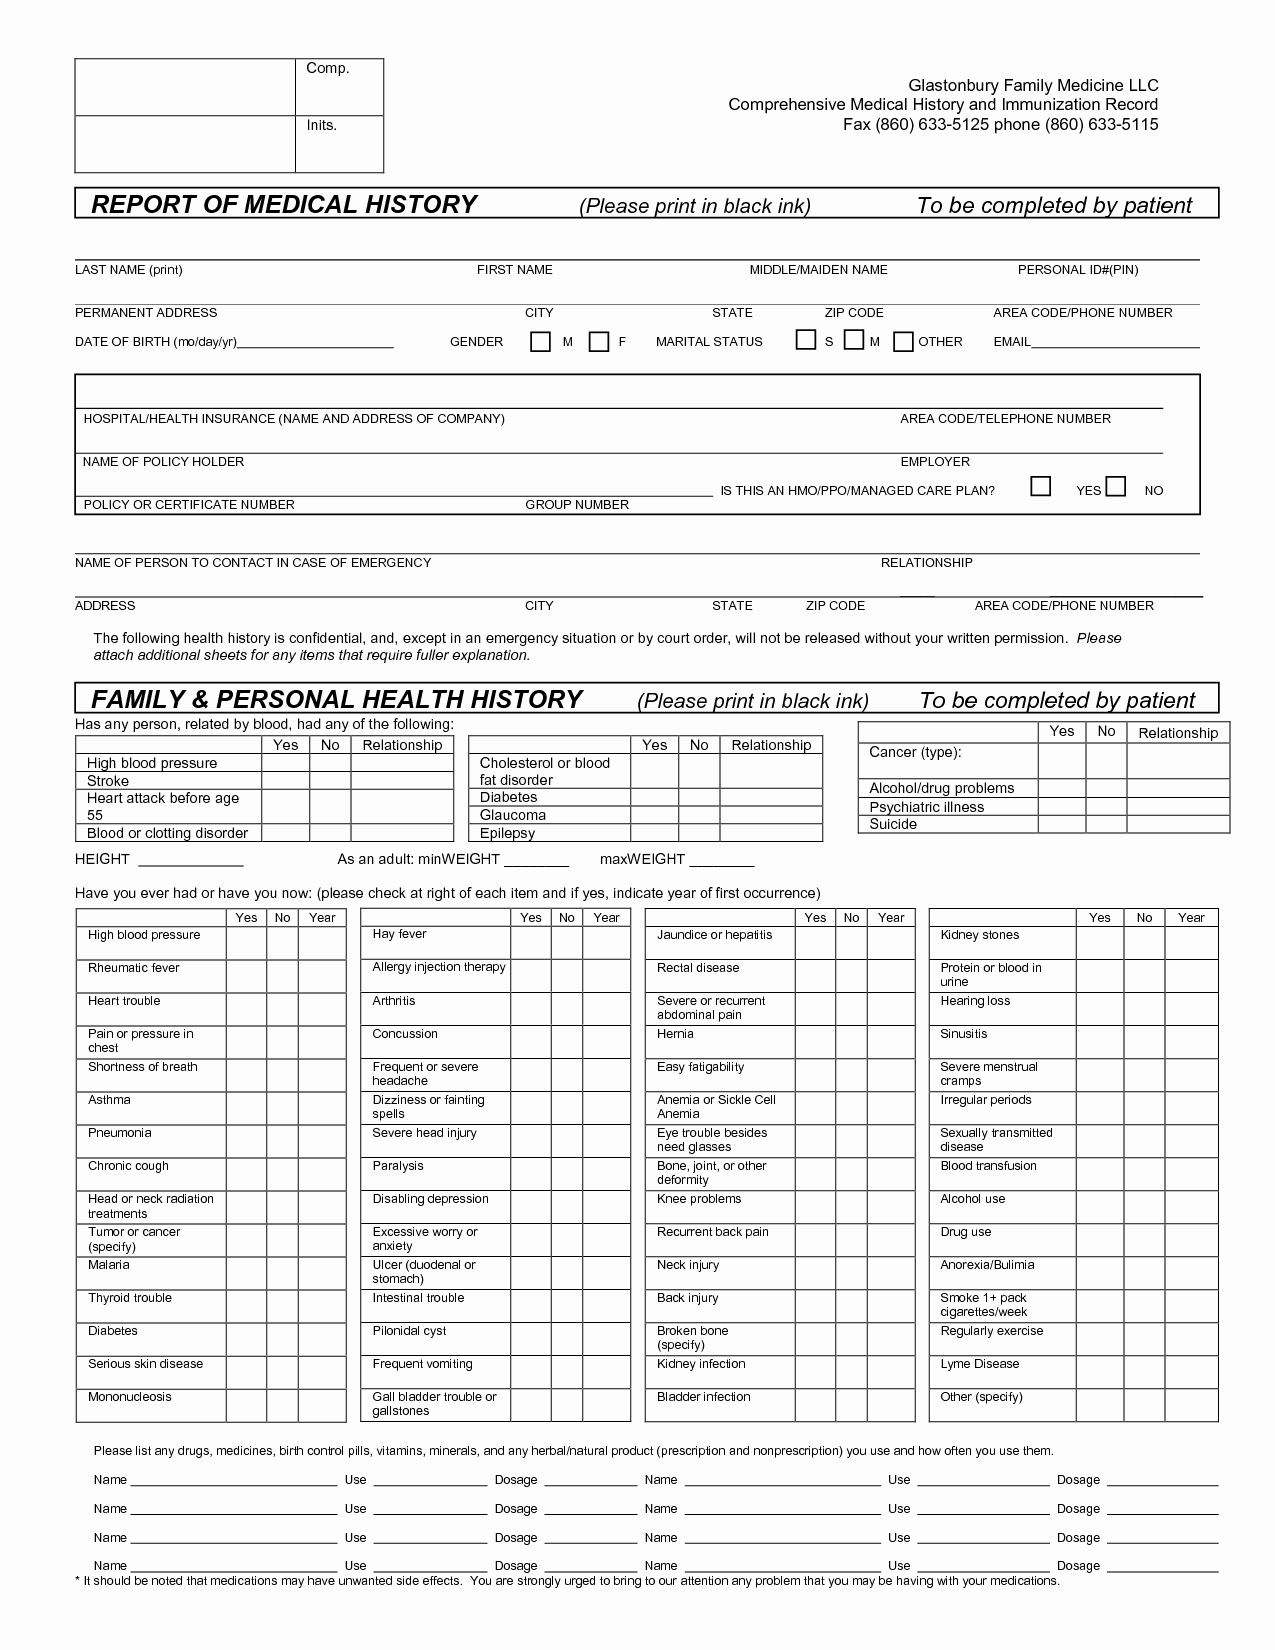 Free Printable Medical forms Lovely Report Of Medical History Family Personal Health History